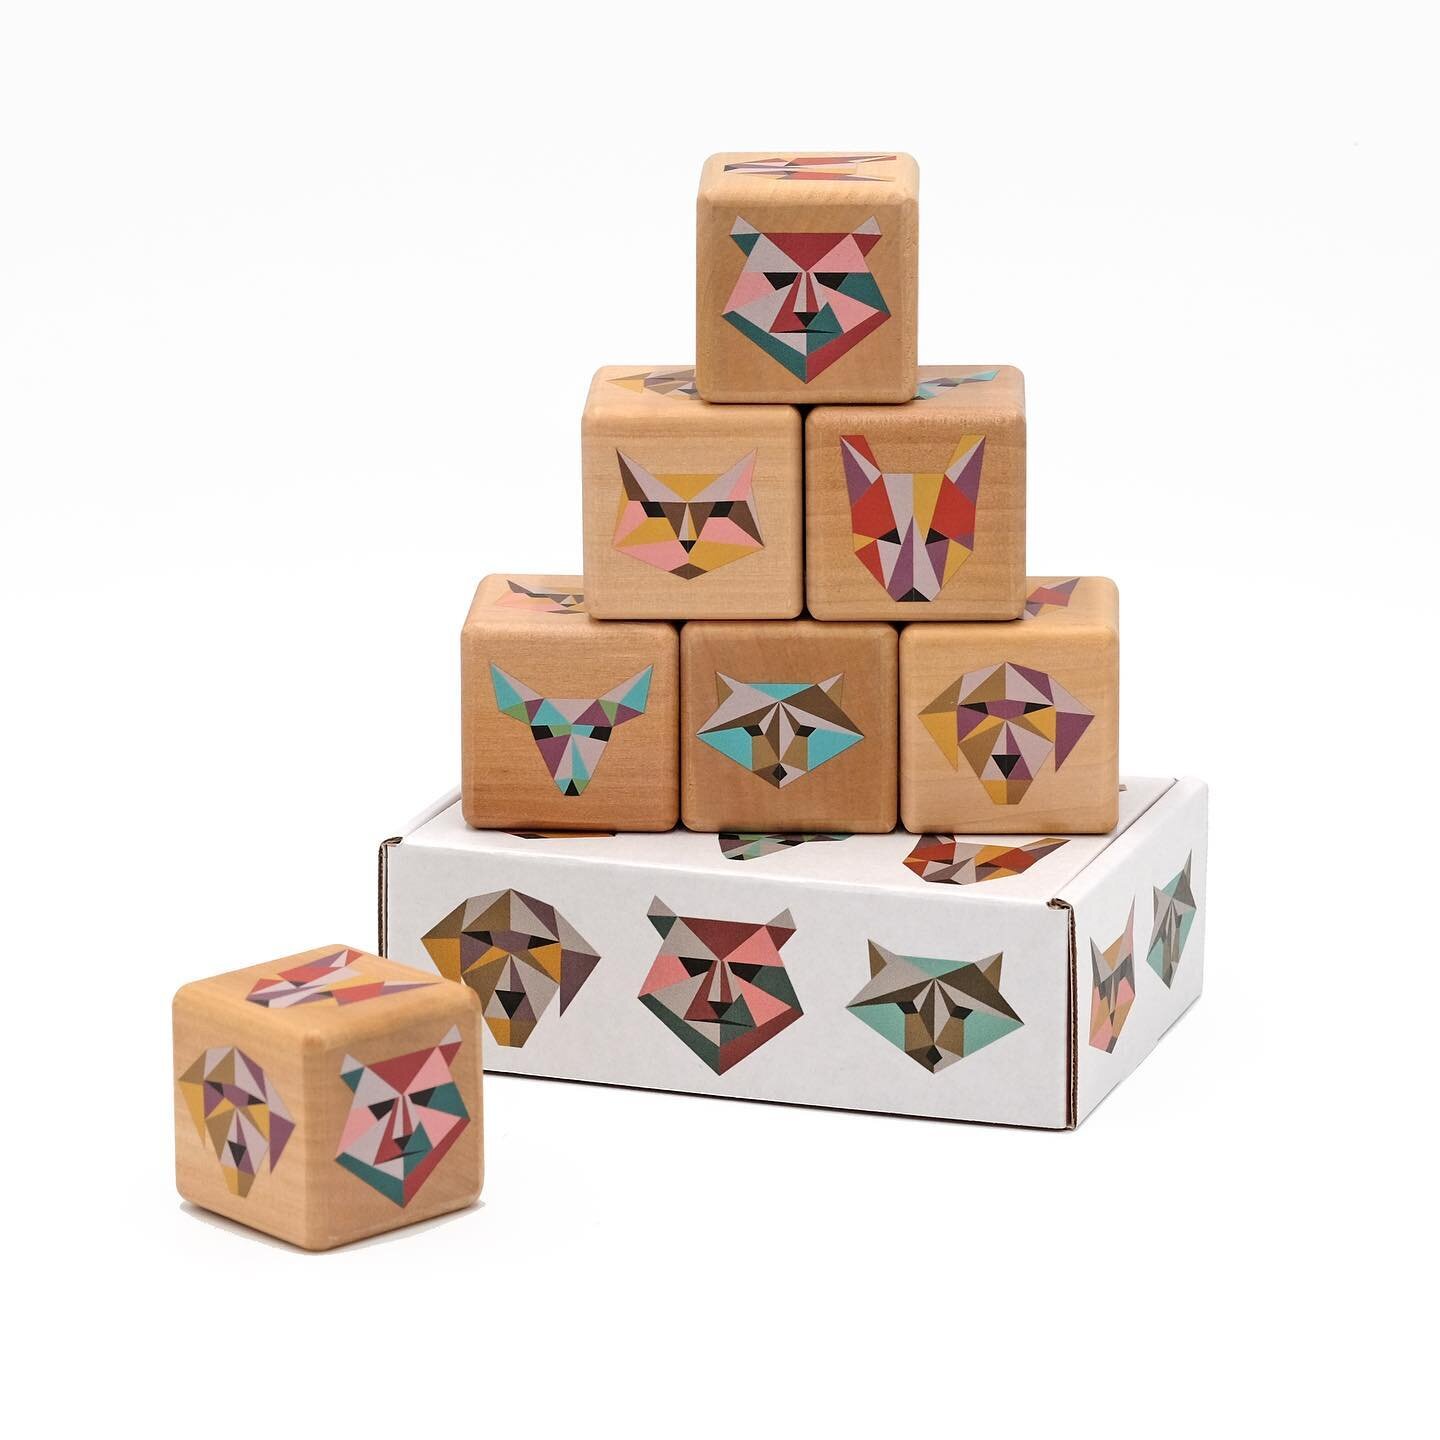 Blockheads are up for sale! Tiny critters with big ideas, shop this post or link in bio to the website. Two inch basswood blocks with durable and vibrant UV cured inks. Six different fun faces in a recyclable box. #blockheads #tinycritters #childrens